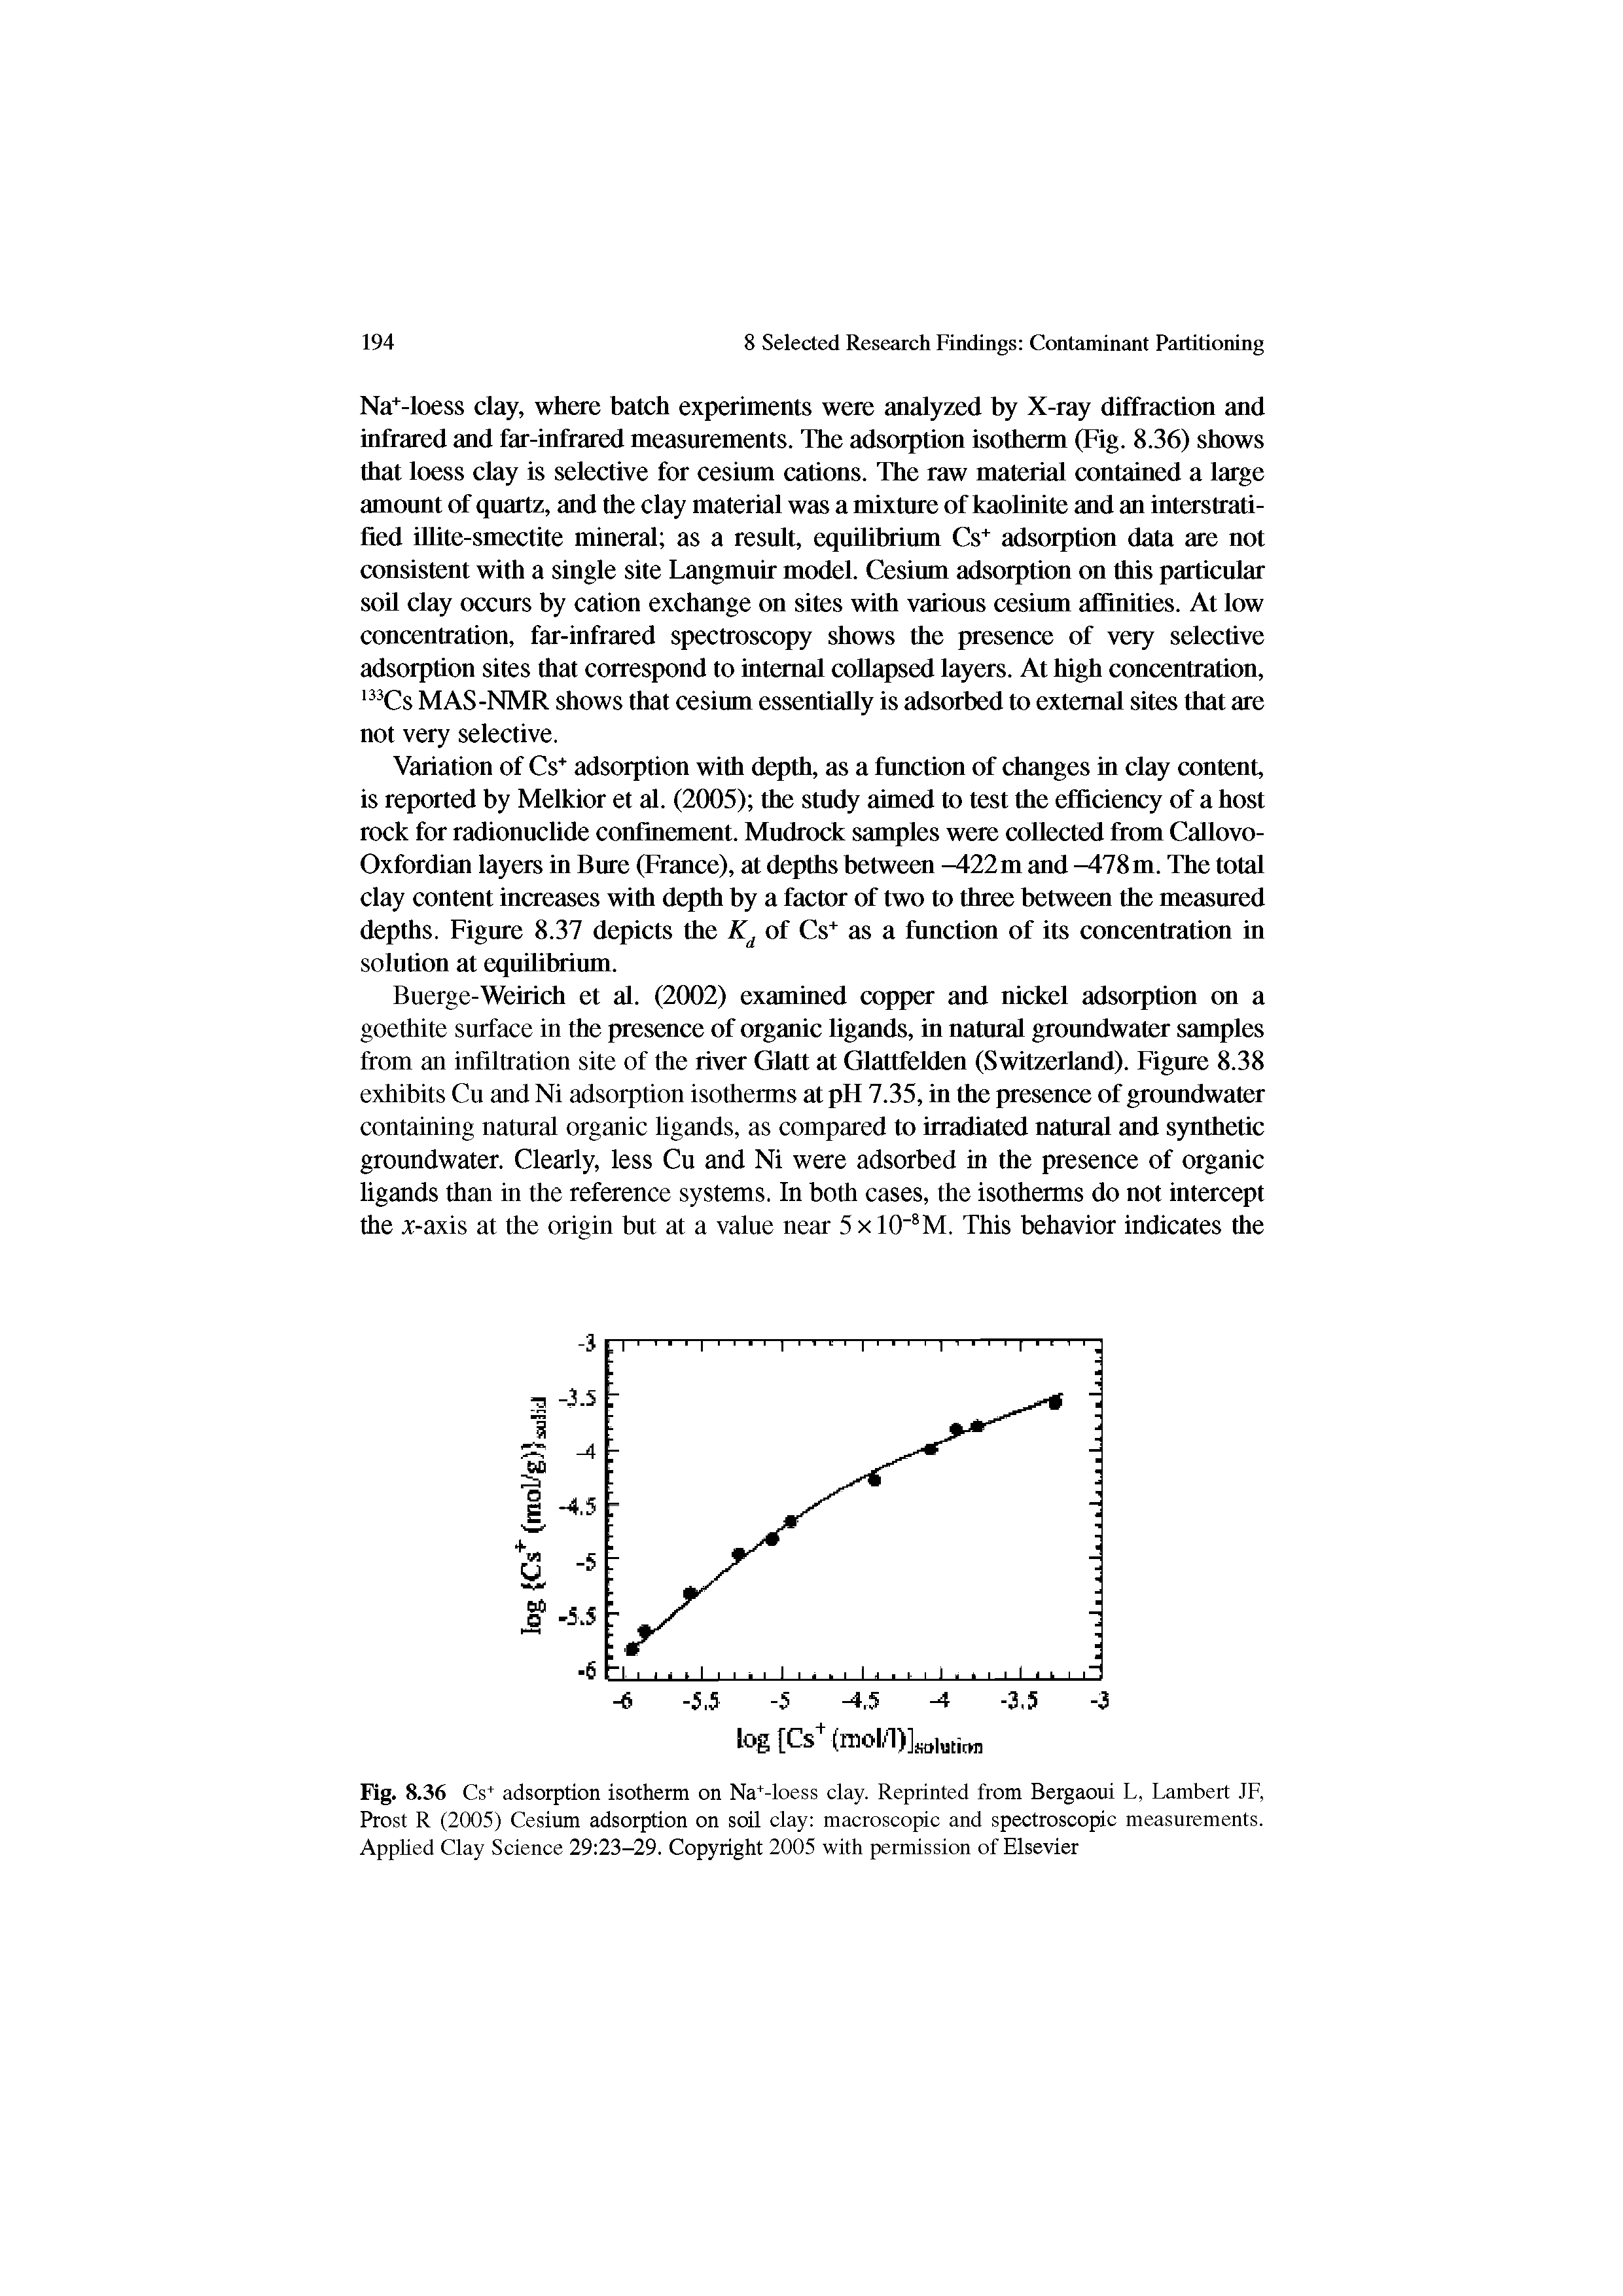 Fig. 8.36 Cs+ adsorption isotherm on Na+-loess clay. Reprinted from Bergaoui L, Lambert JF, Prost R (2005) Cesium adsorption on soil clay macroscopic and spectroscopic measurements. Applied Clay Science 29 23-29. Copyright 2005 with permission of Elsevier...